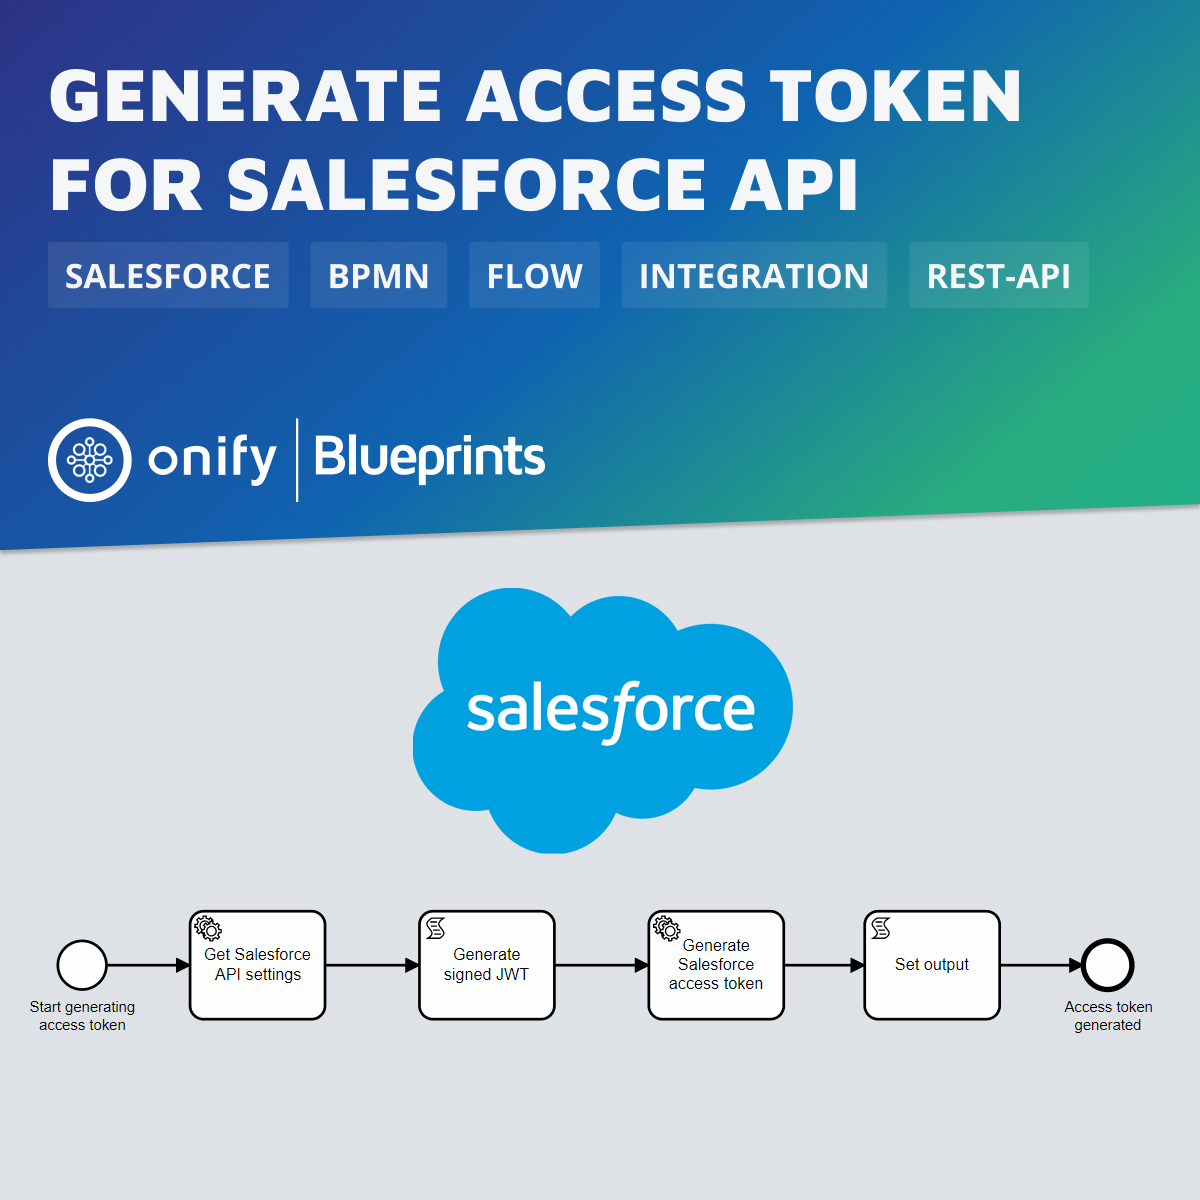 Onify Blueprint – Generate access token for Salesforce API